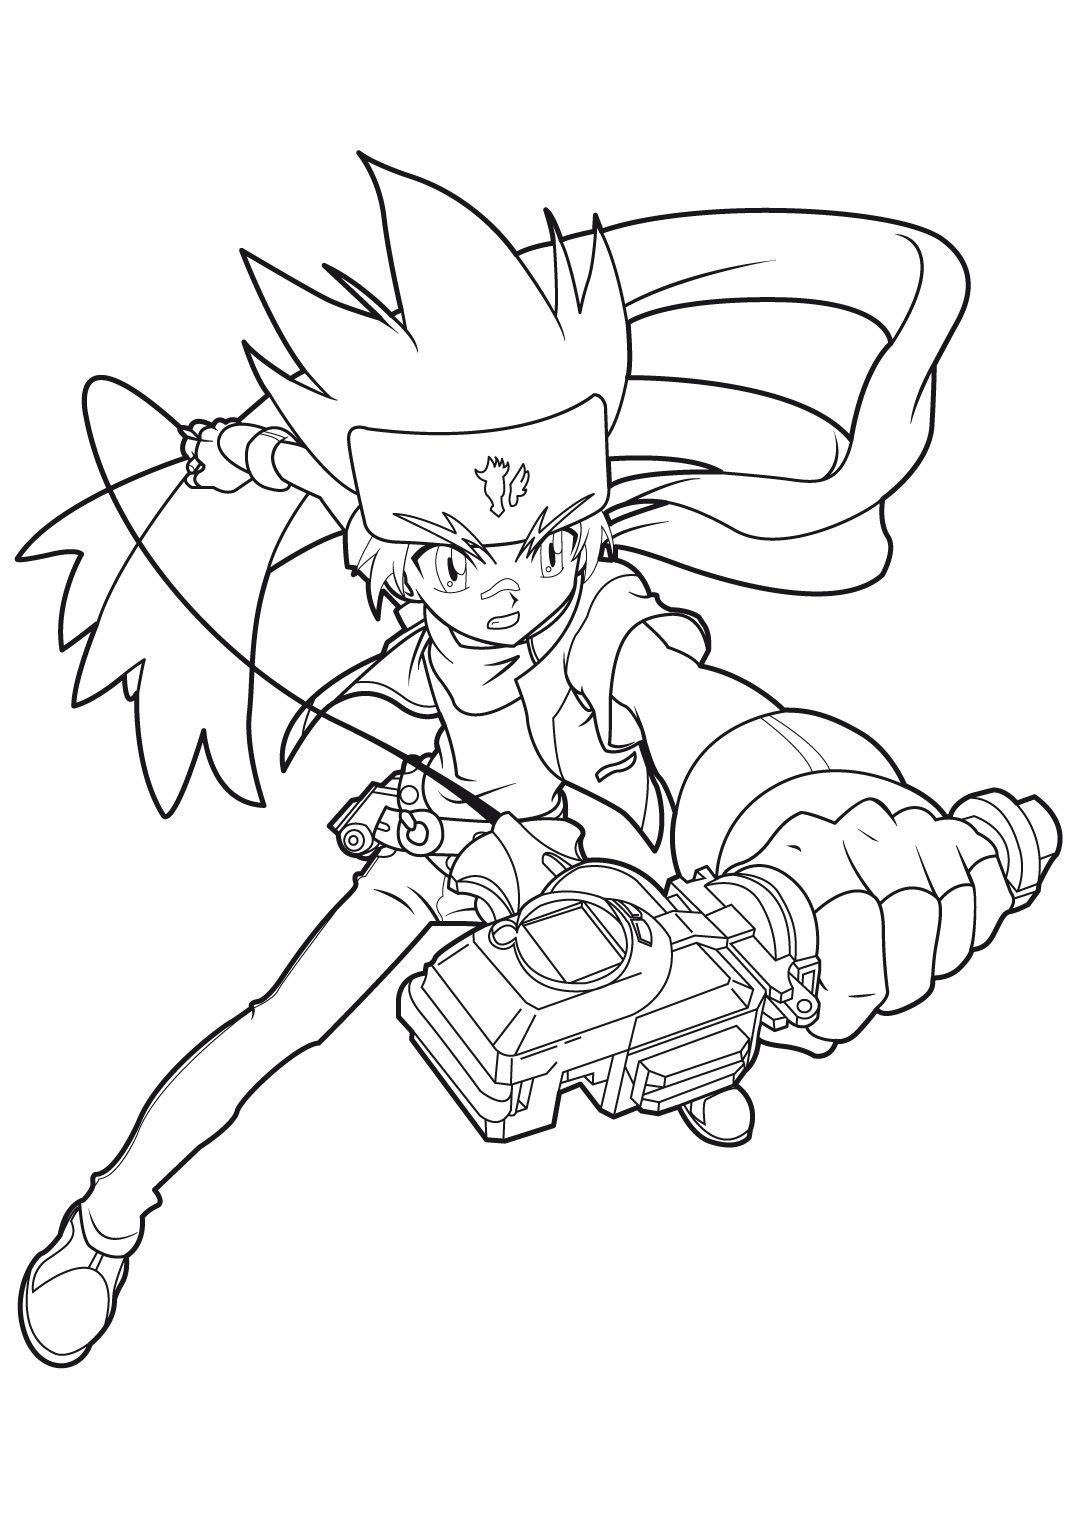 Coloriage Gingka 6 - Coloriage Beyblade - Coloriages Dessins animes